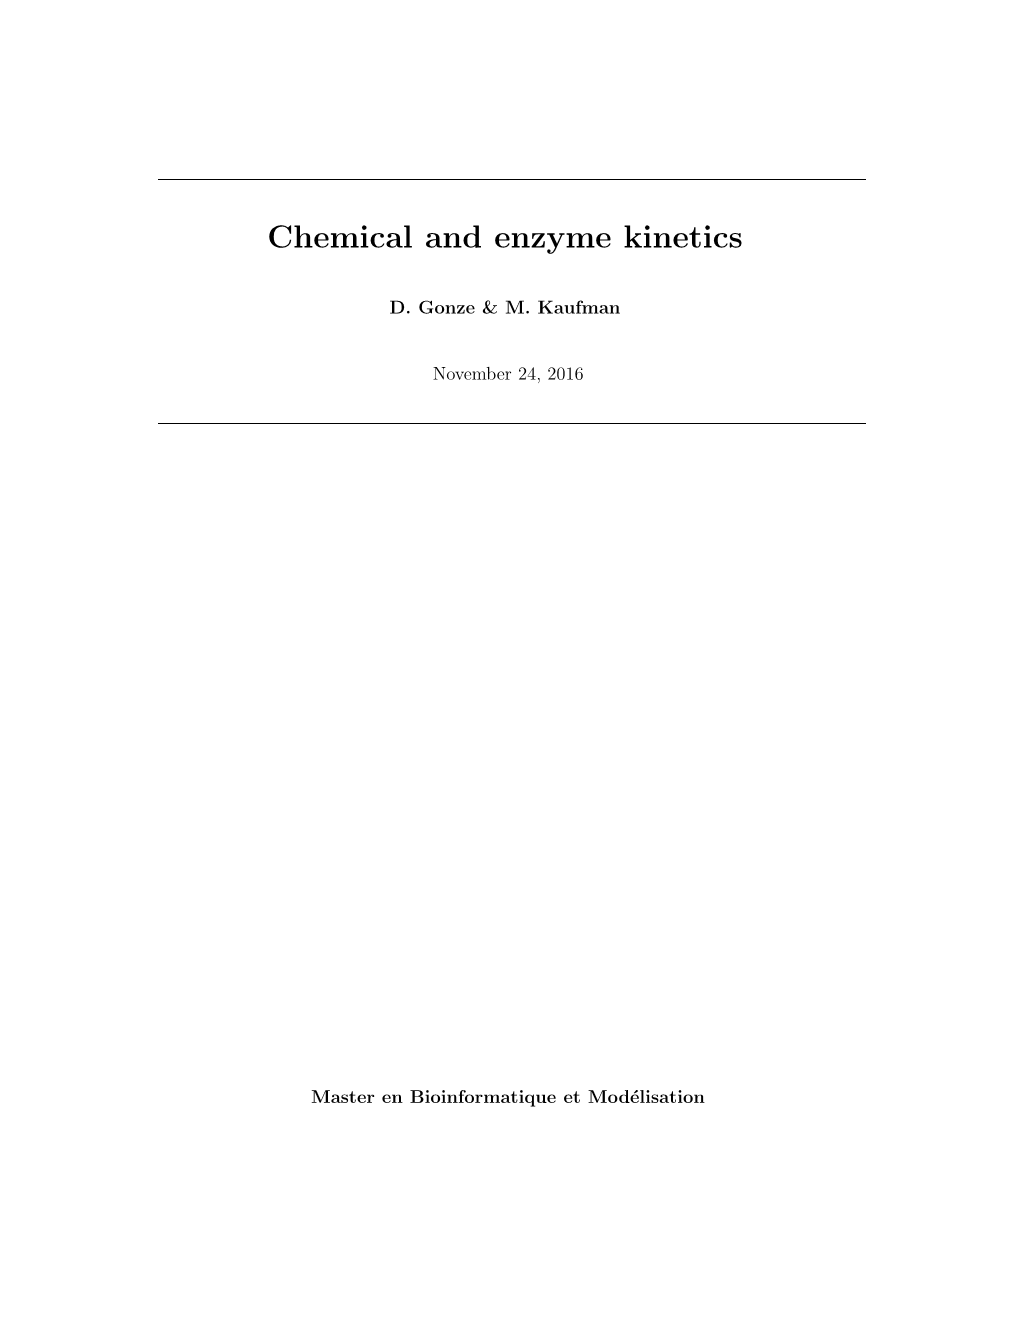 Chemical and Enzyme Kinetics